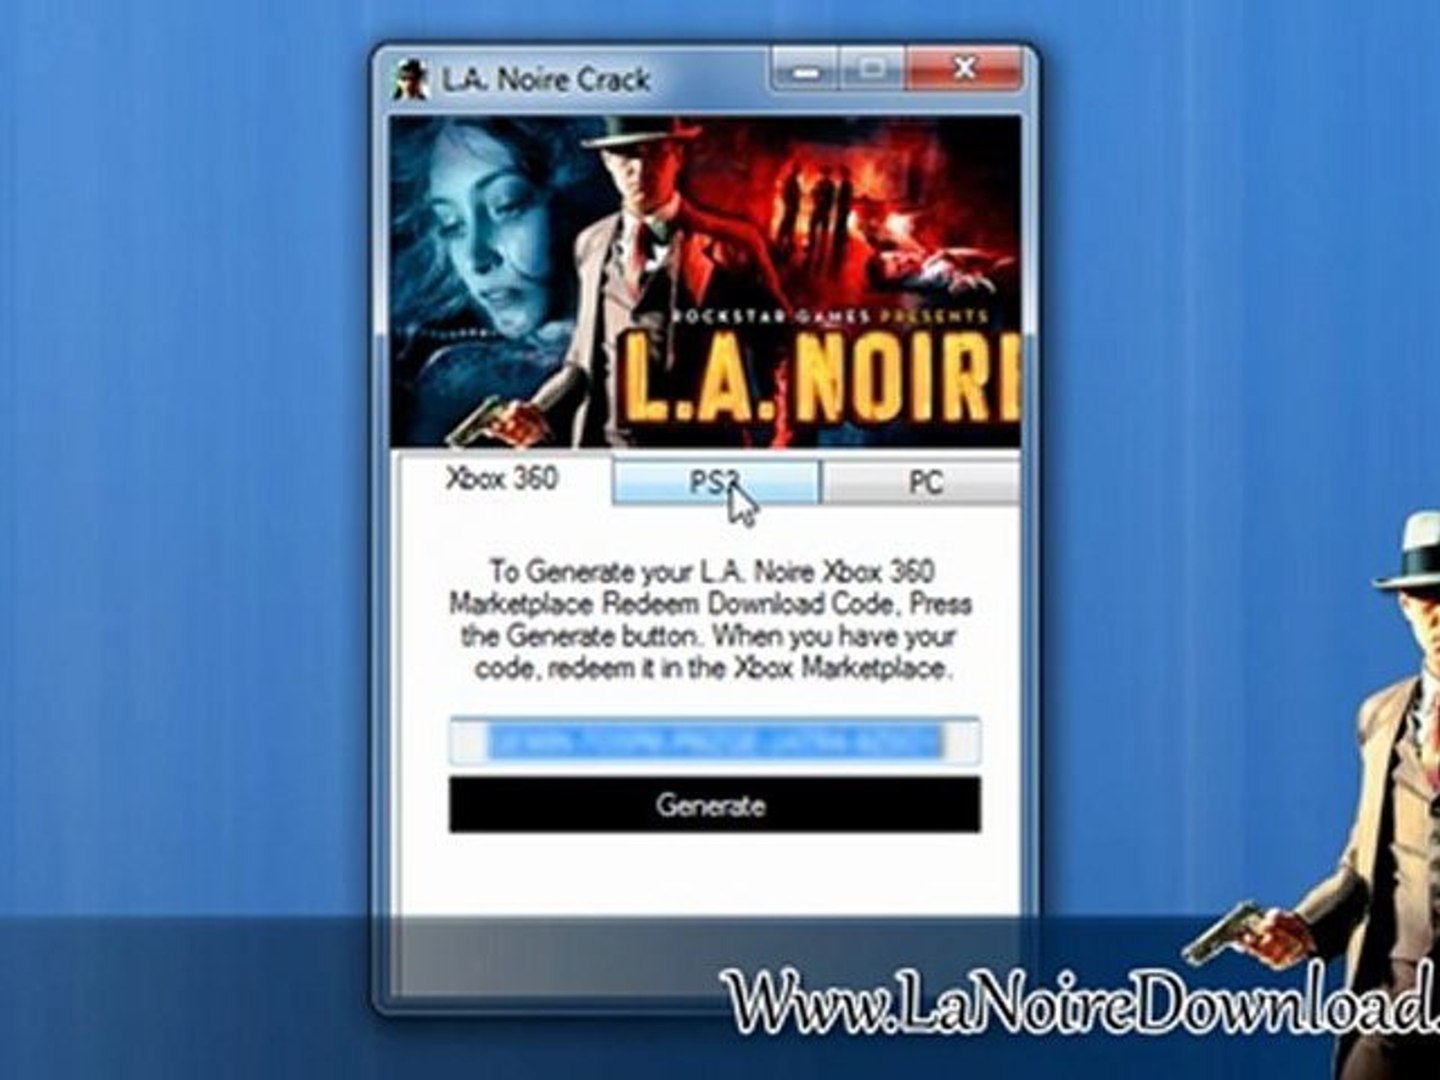 Install L.A. Noire Crack Free on Xbox 360 / PC / PS3 - video Dailymotion